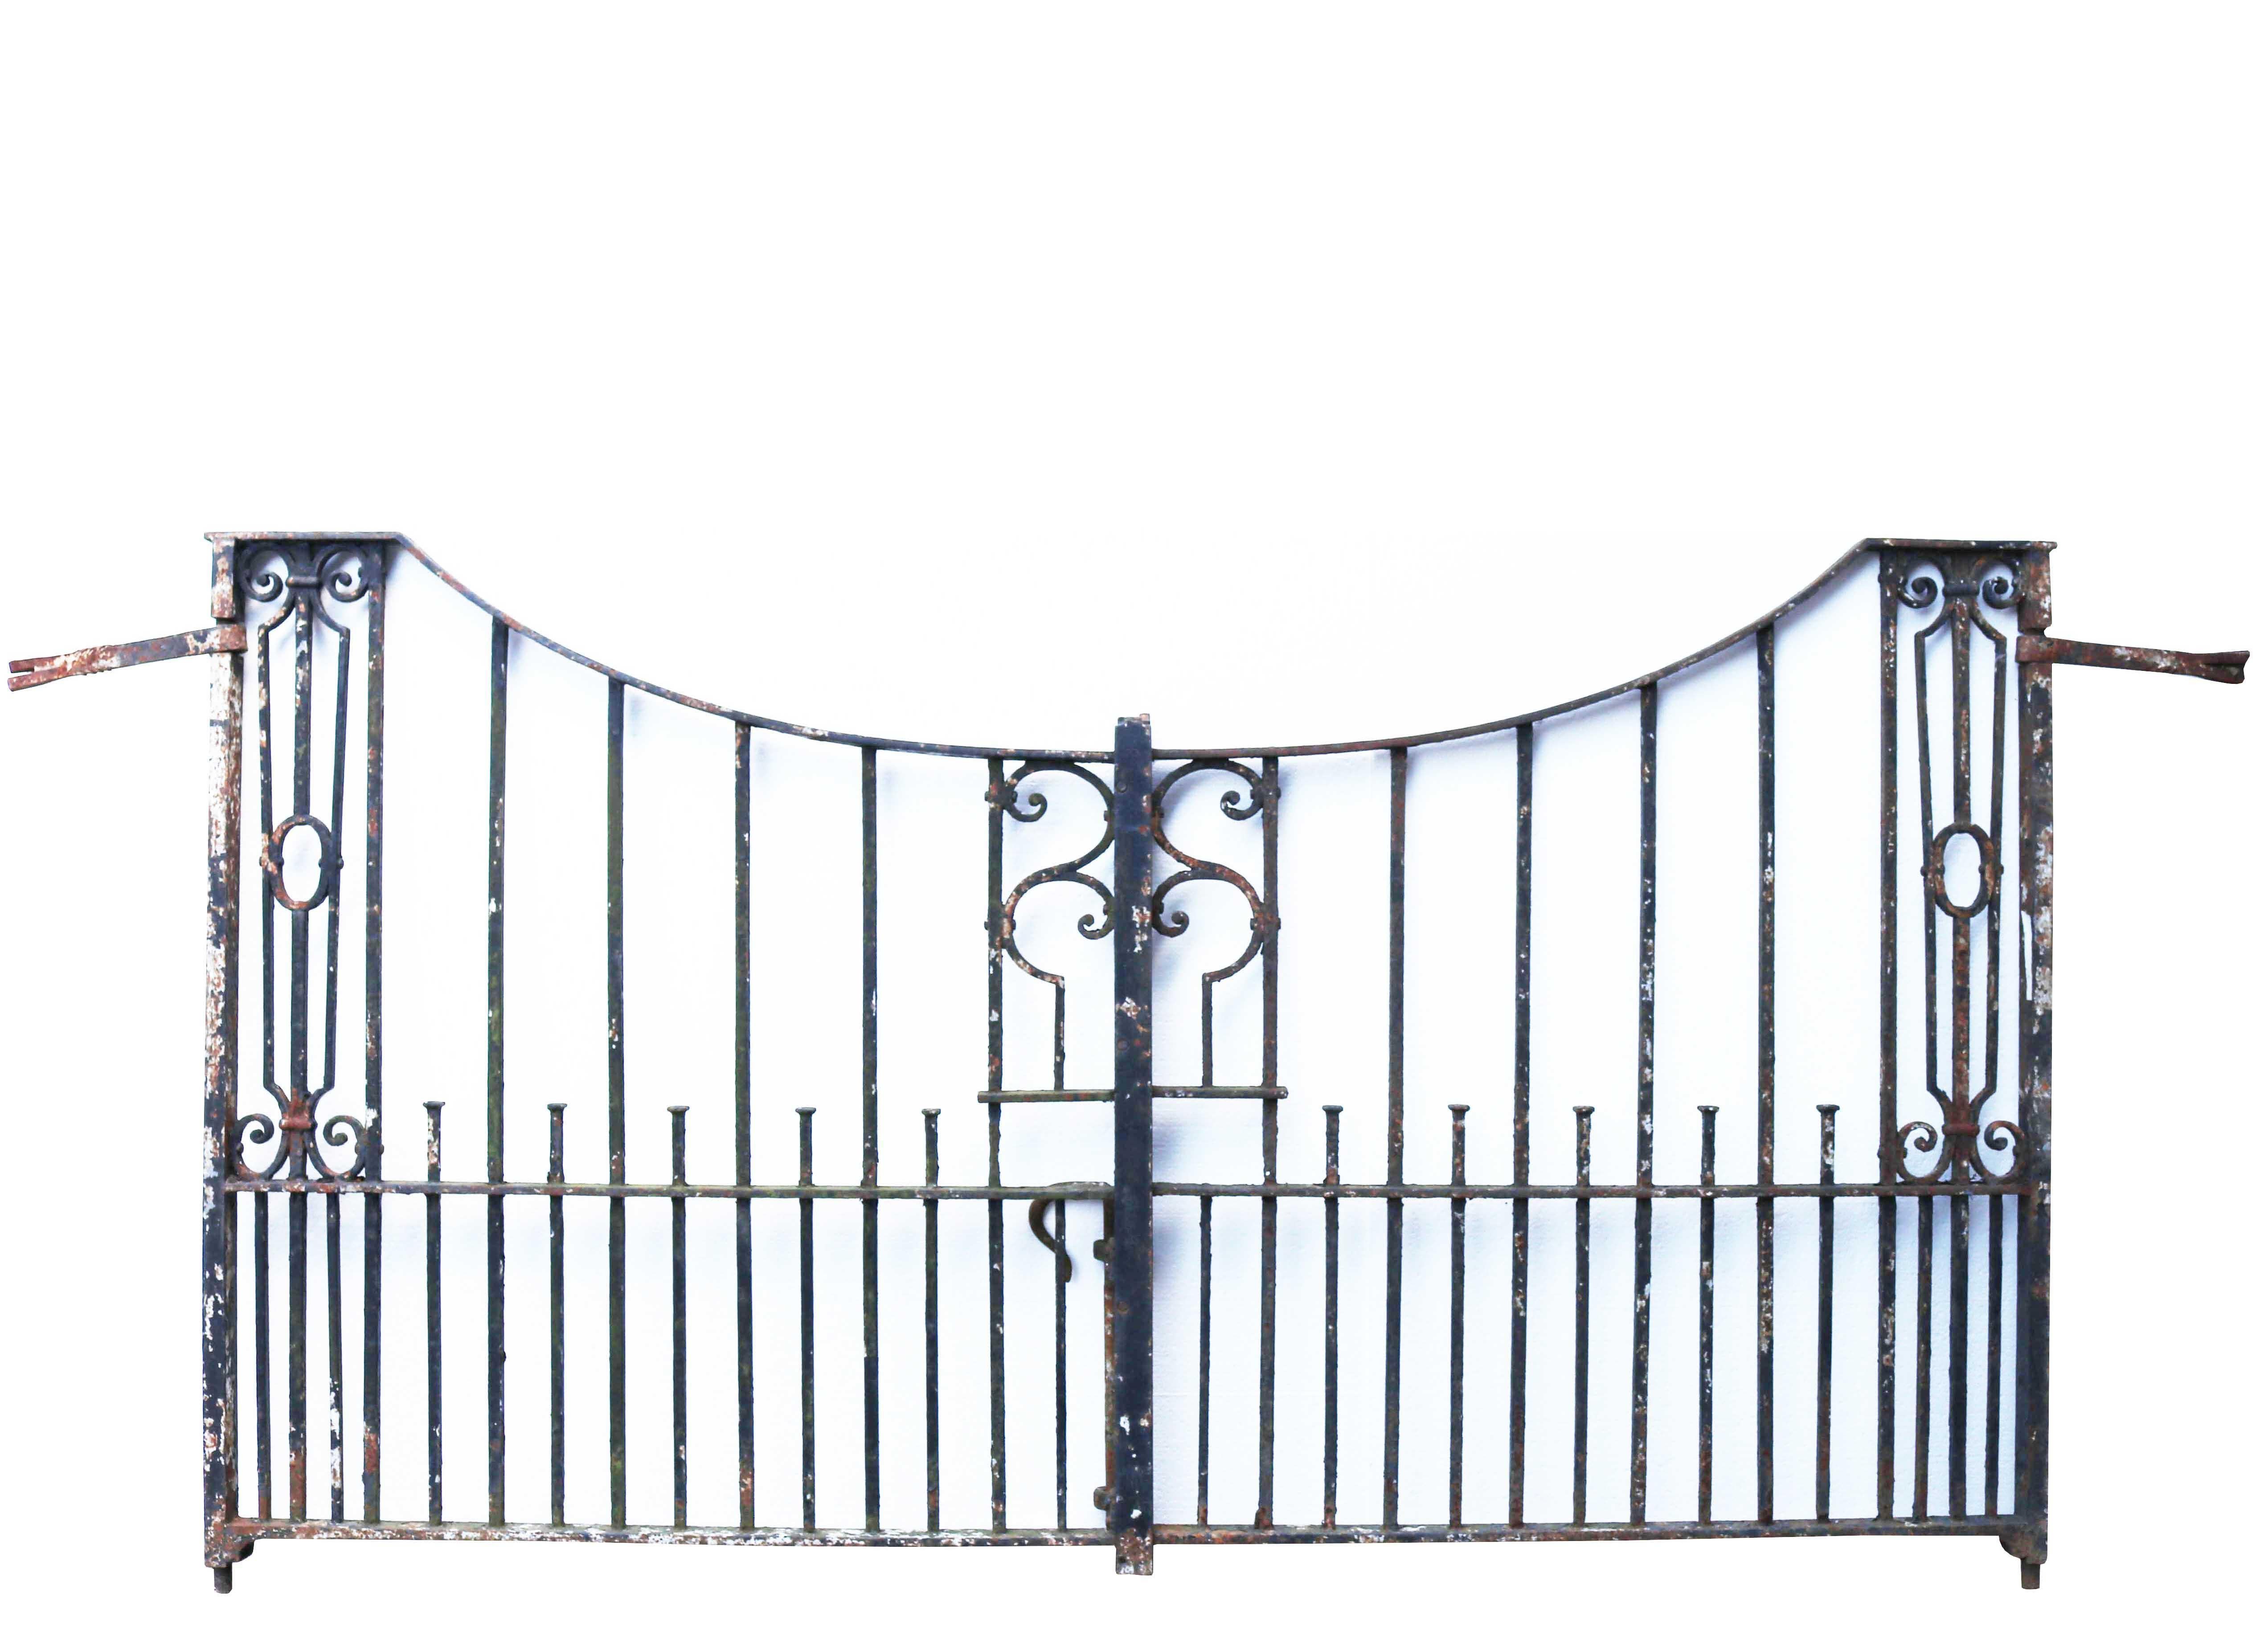 About

A pair of heavy duty late Victorian period wrought iron driveway gates.

Condition report

Good structural condition. Minor surface rust and traces of old paint. Gate stay fitted. Parts of original hinges